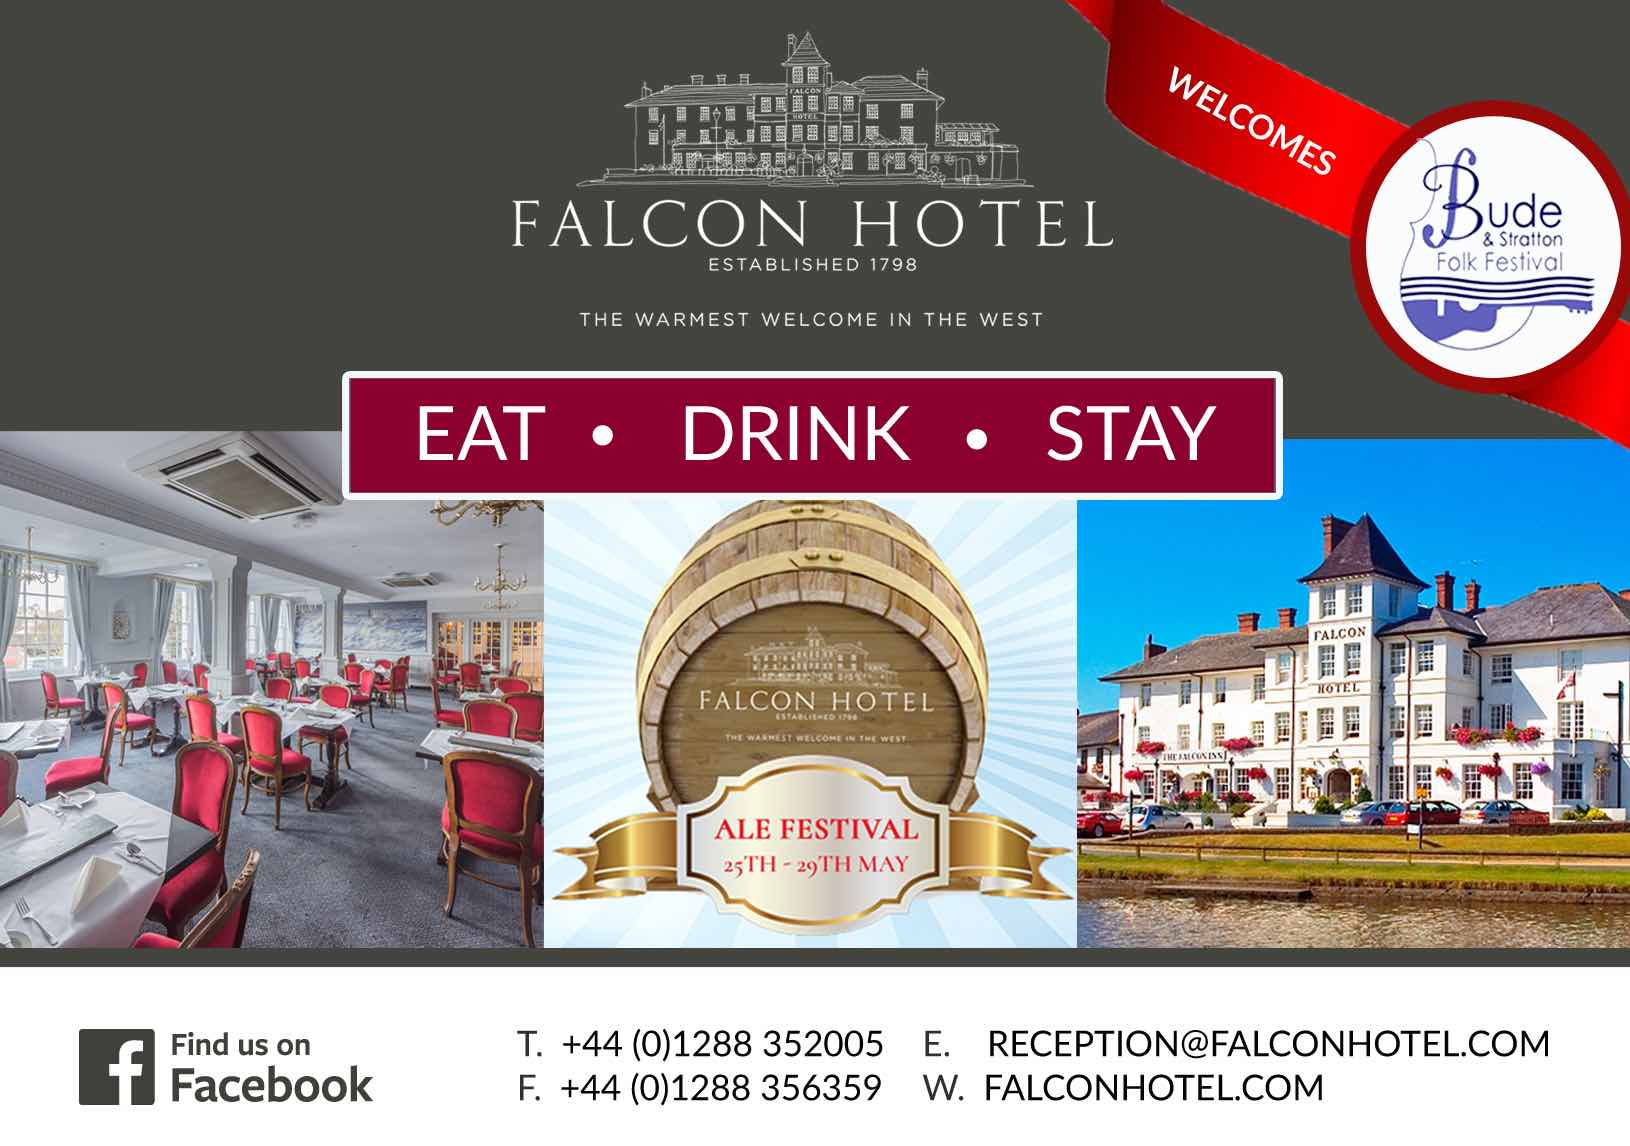 Ad for The Facon Hotel, Bude